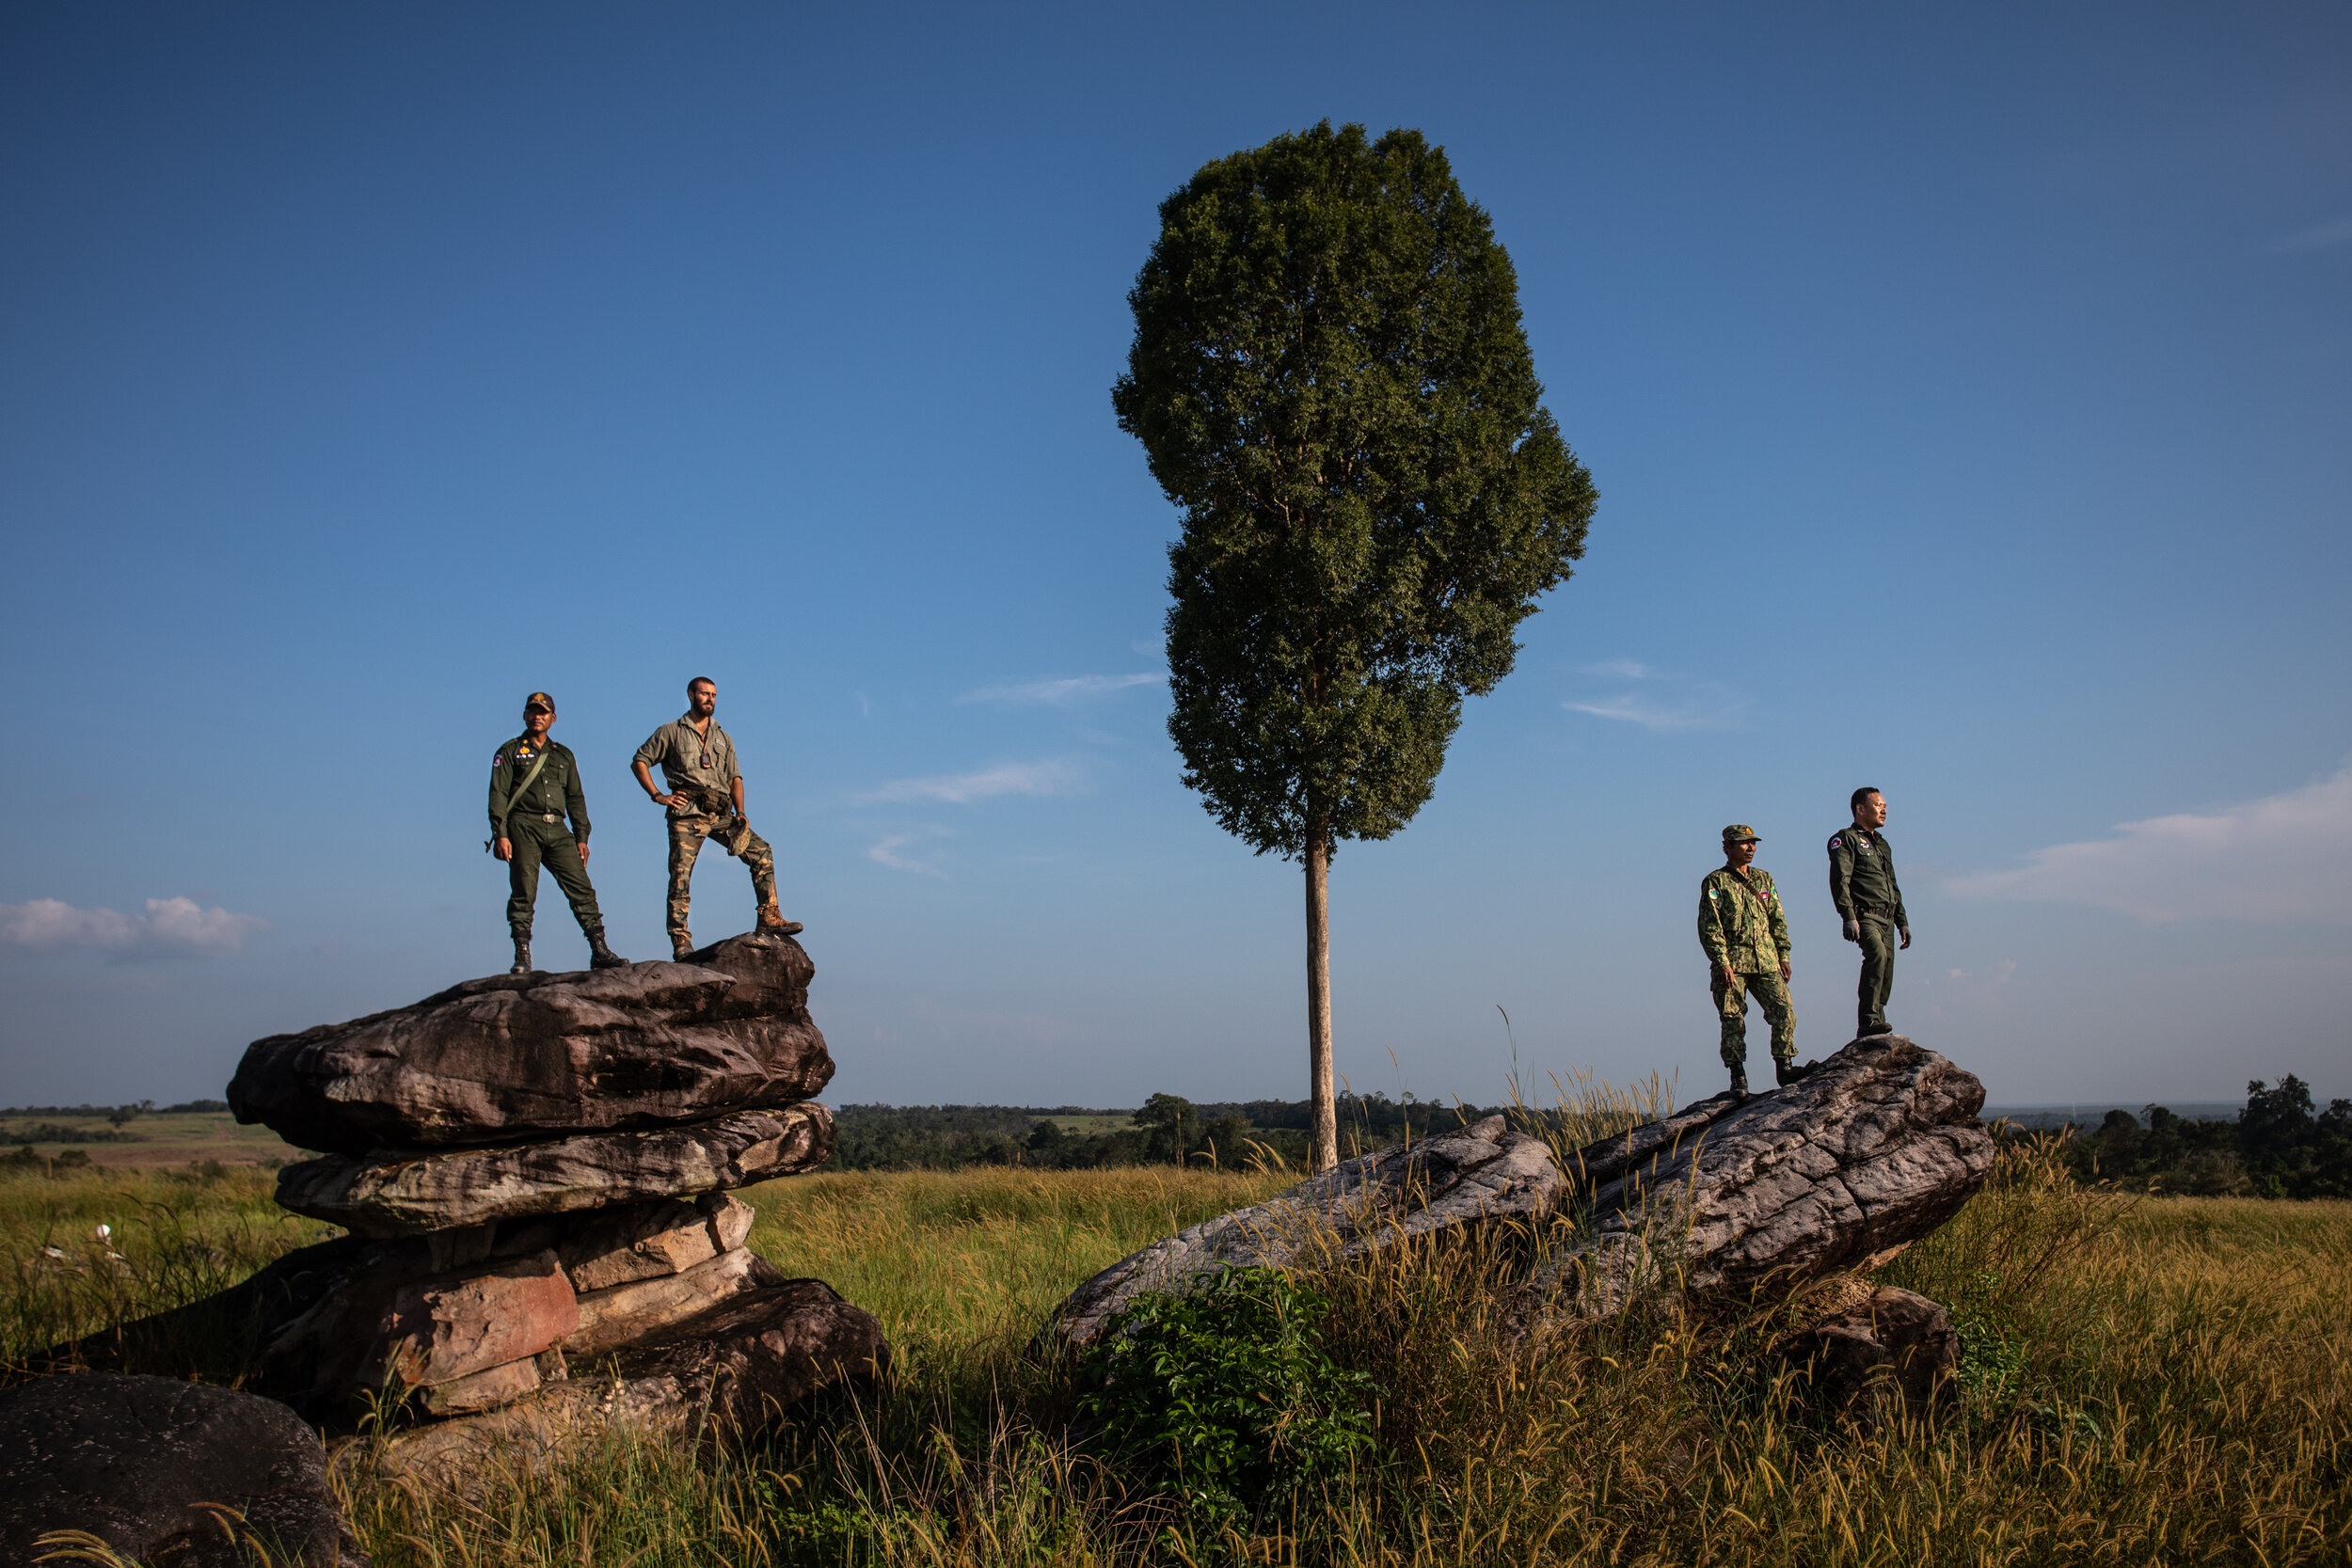  Wildlife Alliance rangers pose for a portrait during a break halfway through a daily patrol. 